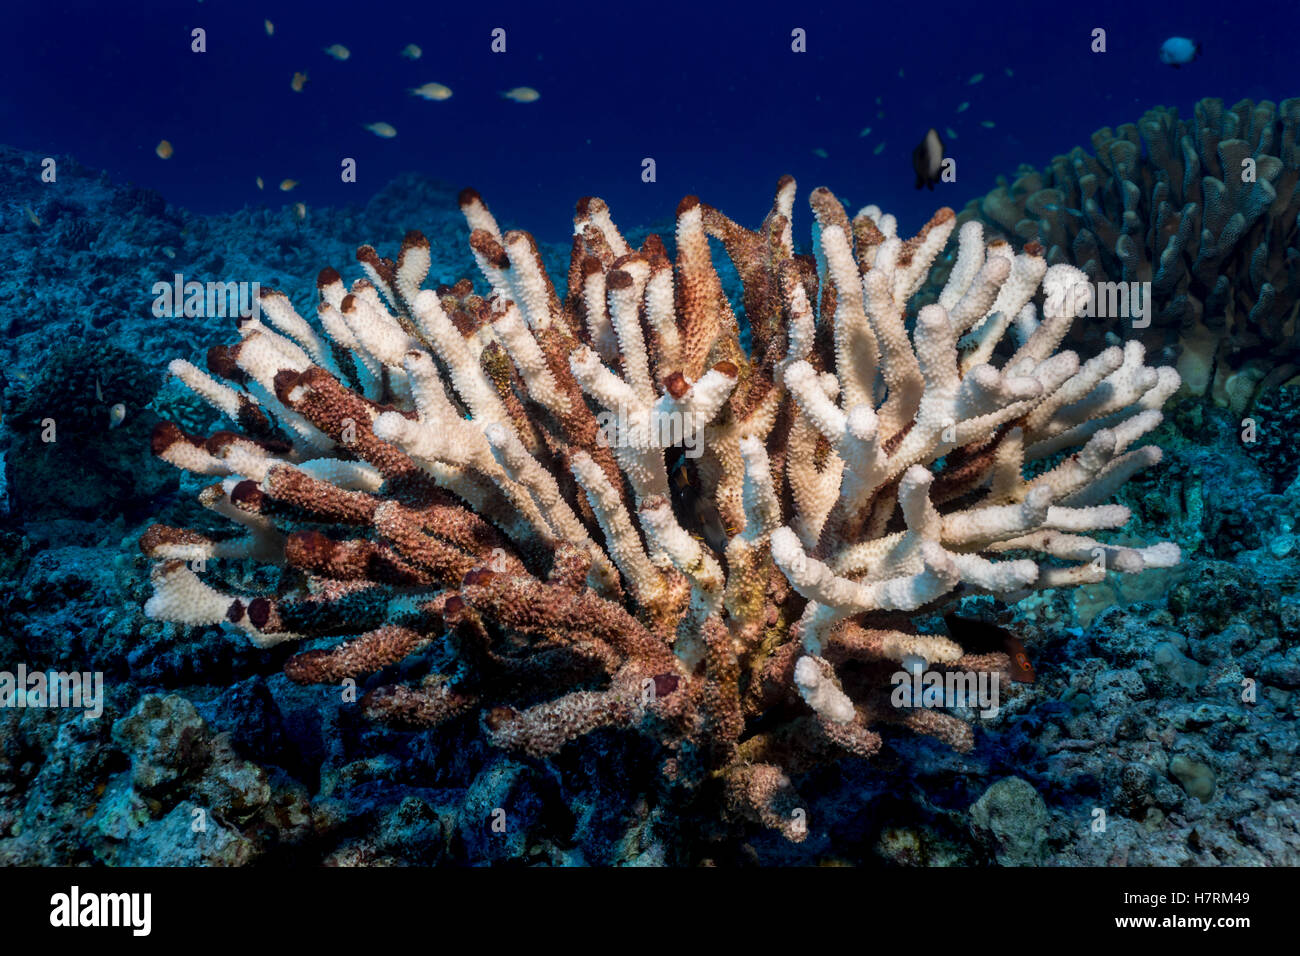 Antler Coral (Pocillopora Eydouxi) Bleached White By The Compounding Effects Of An El Nino With Global Warming Photographed While Scuba Diving The ... Stock Photo